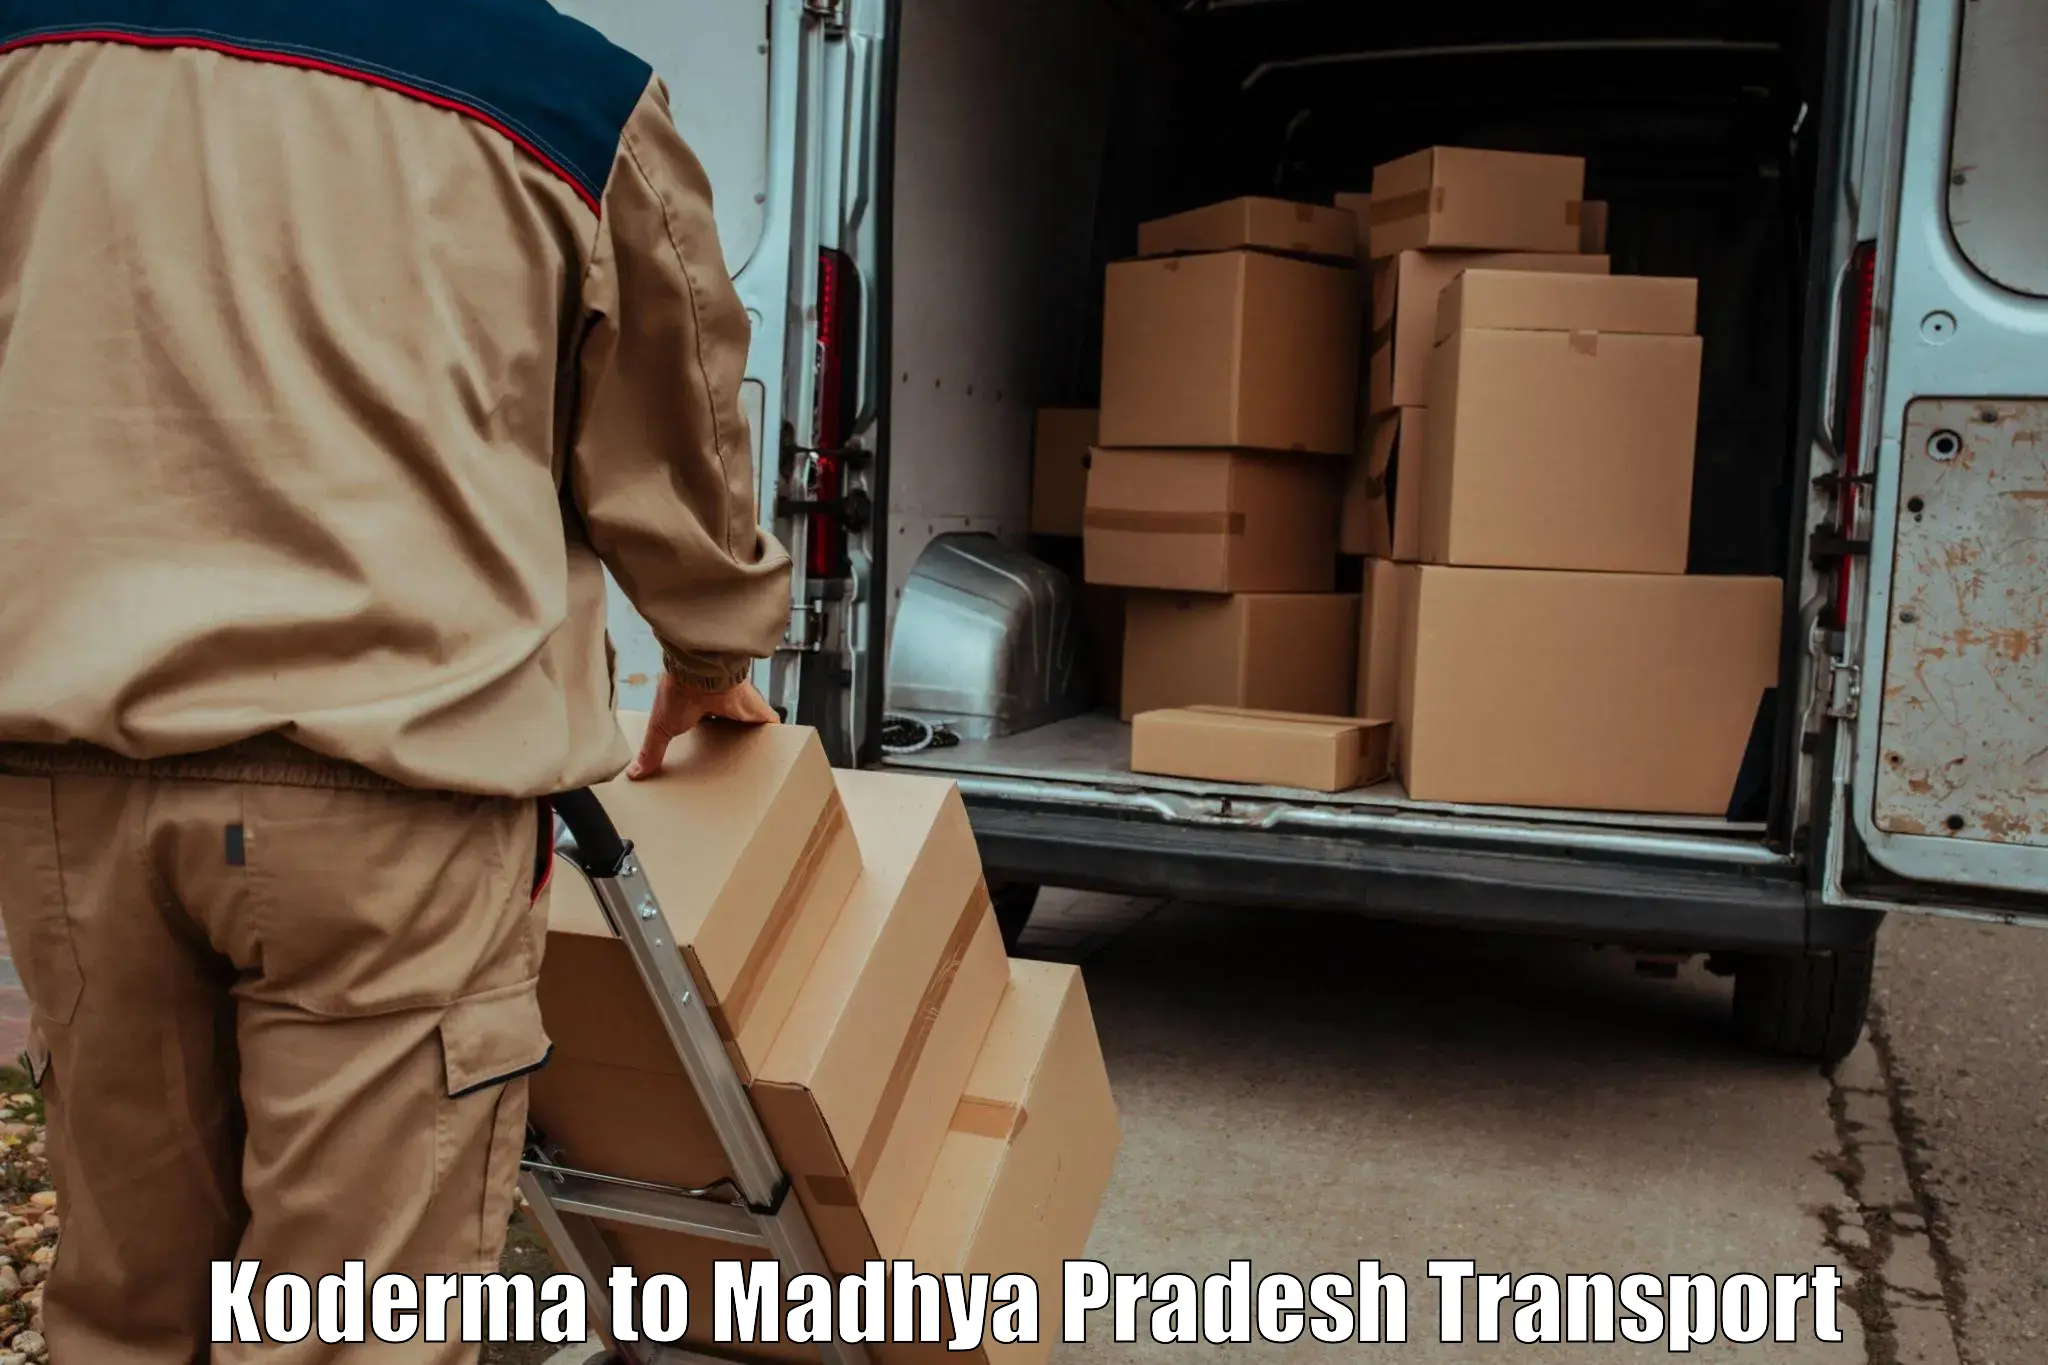 Parcel transport services Koderma to Chand Chaurai